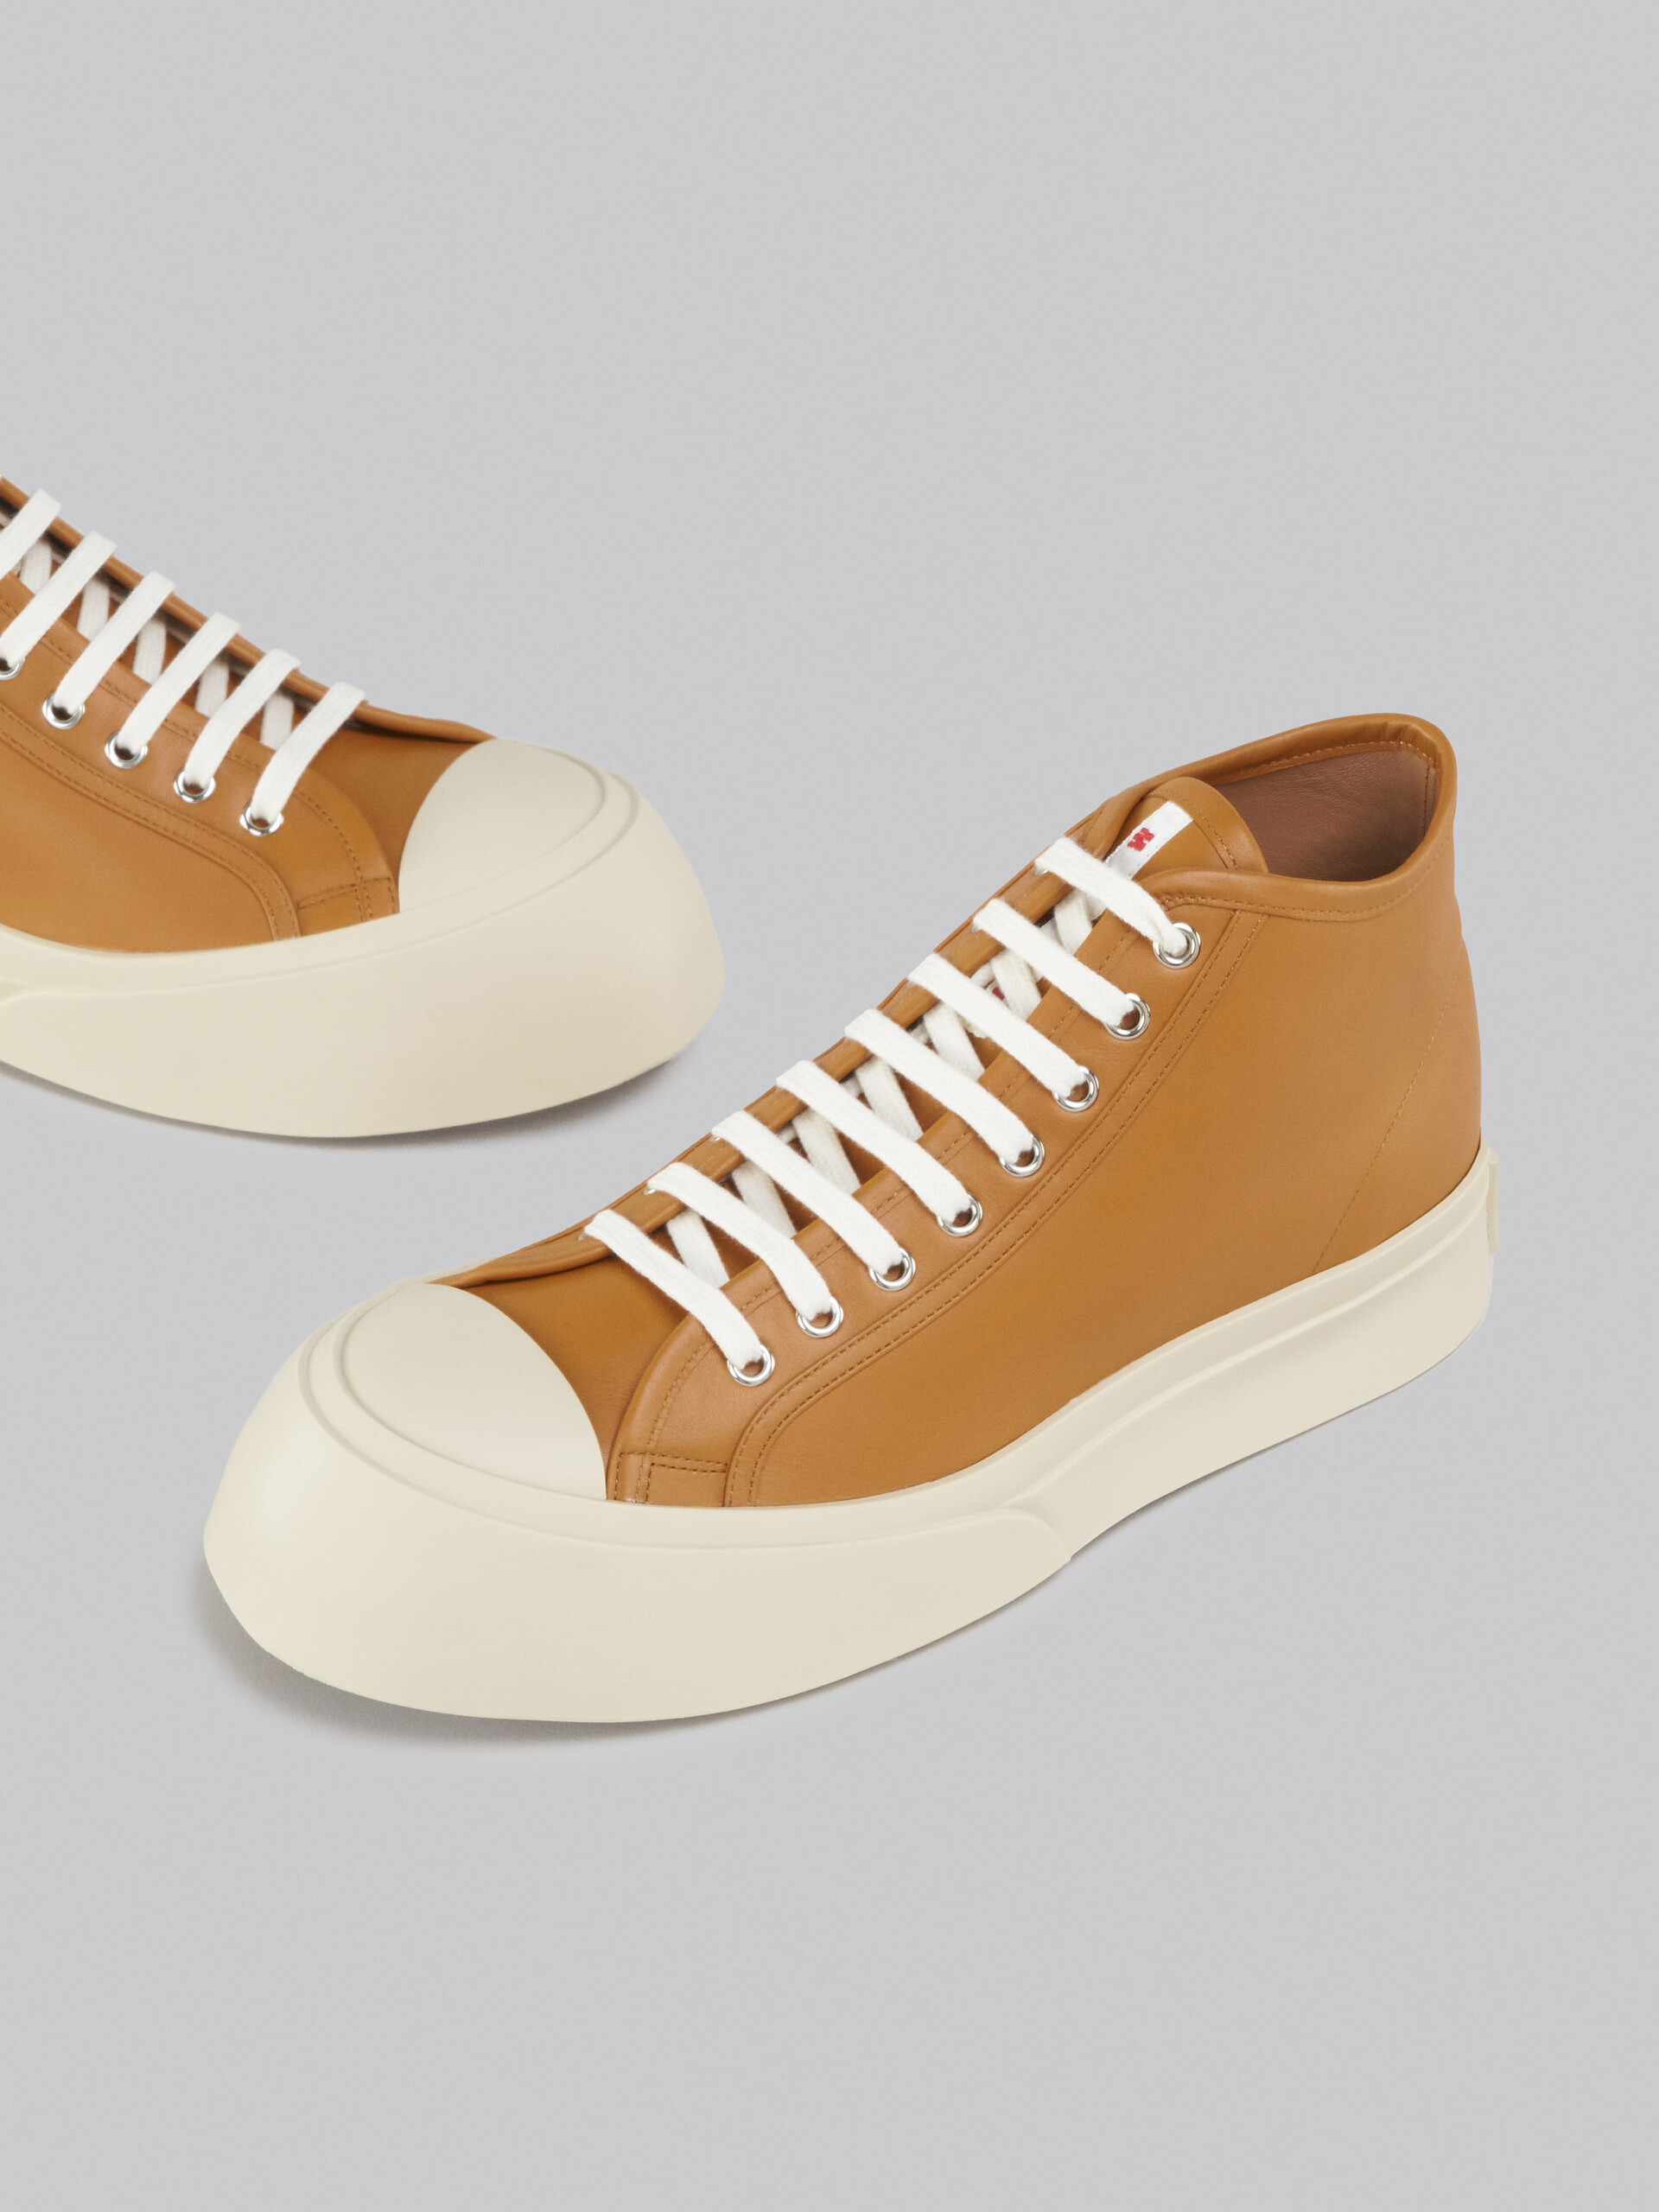 Blue nappa leather Pablo high-top sneaker - Sneakers - Image 4